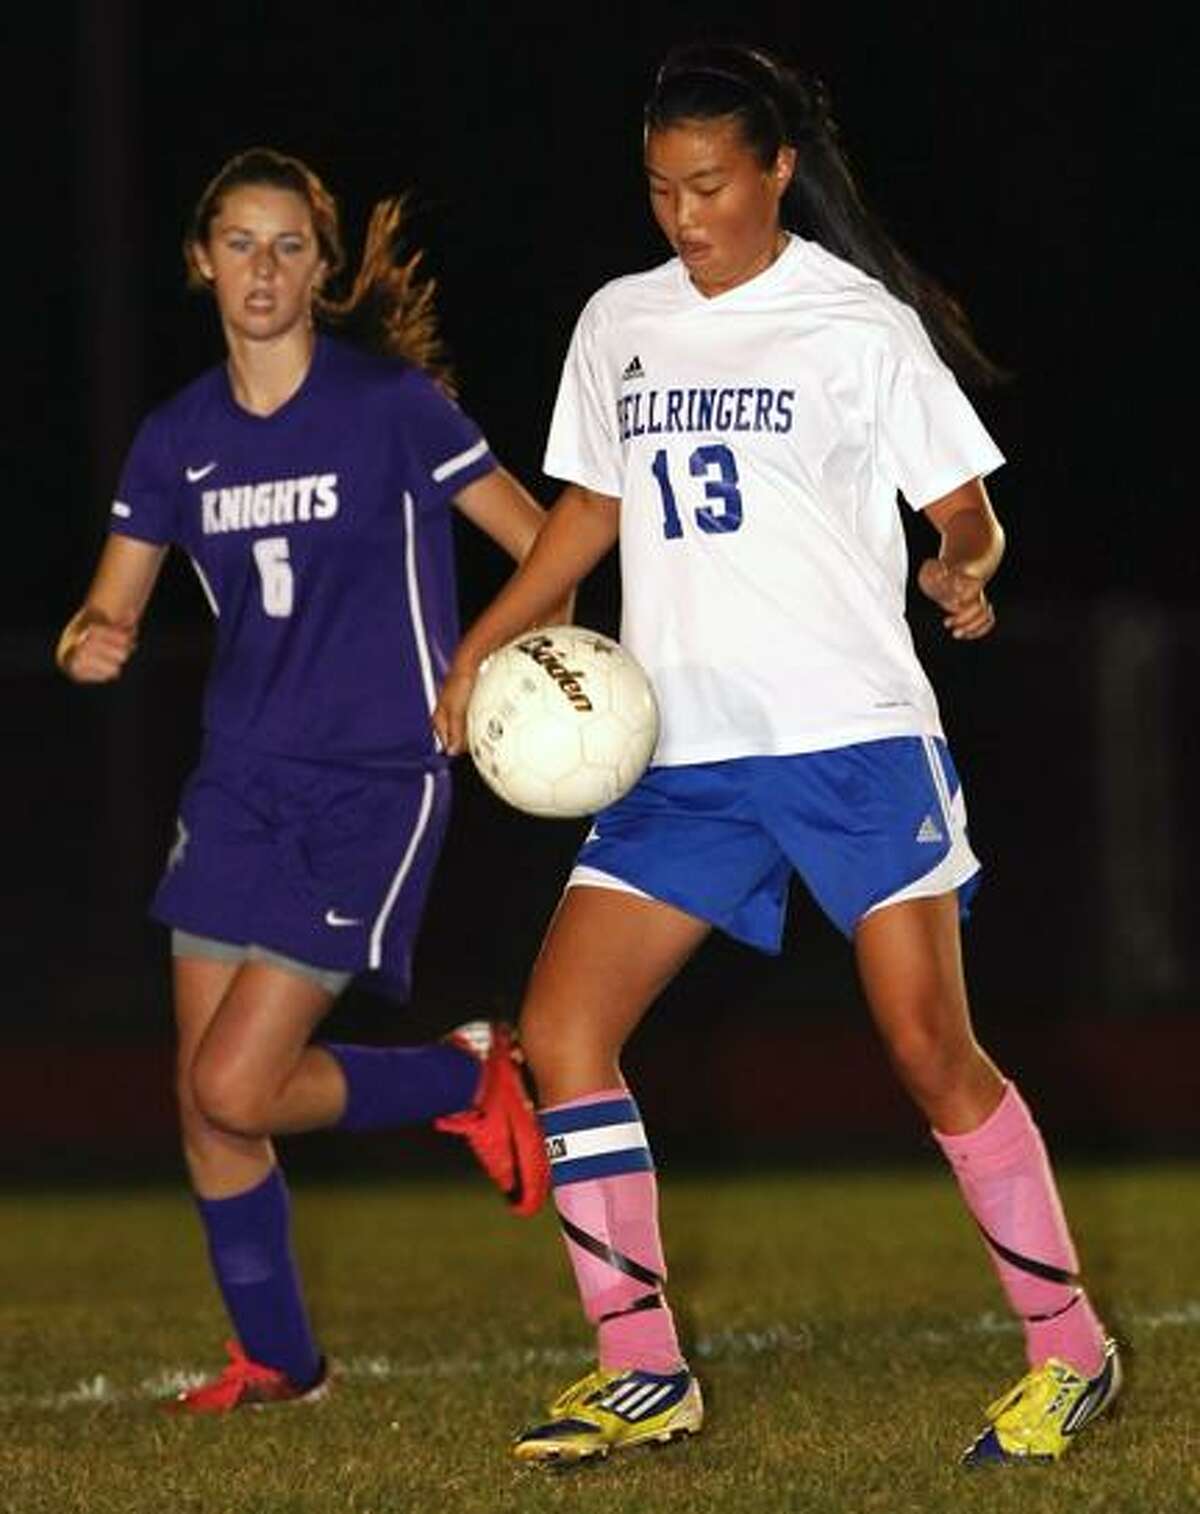 Special to the Press 10.25.12 East Hampton's Renee Radavich battles Westbrook's Casey Abraham in Thursday night's girls' soccer game. East Hampton led, 3-1 late in the game. To buy a glossy print of this photo and more, visit www.middletownpress.com.